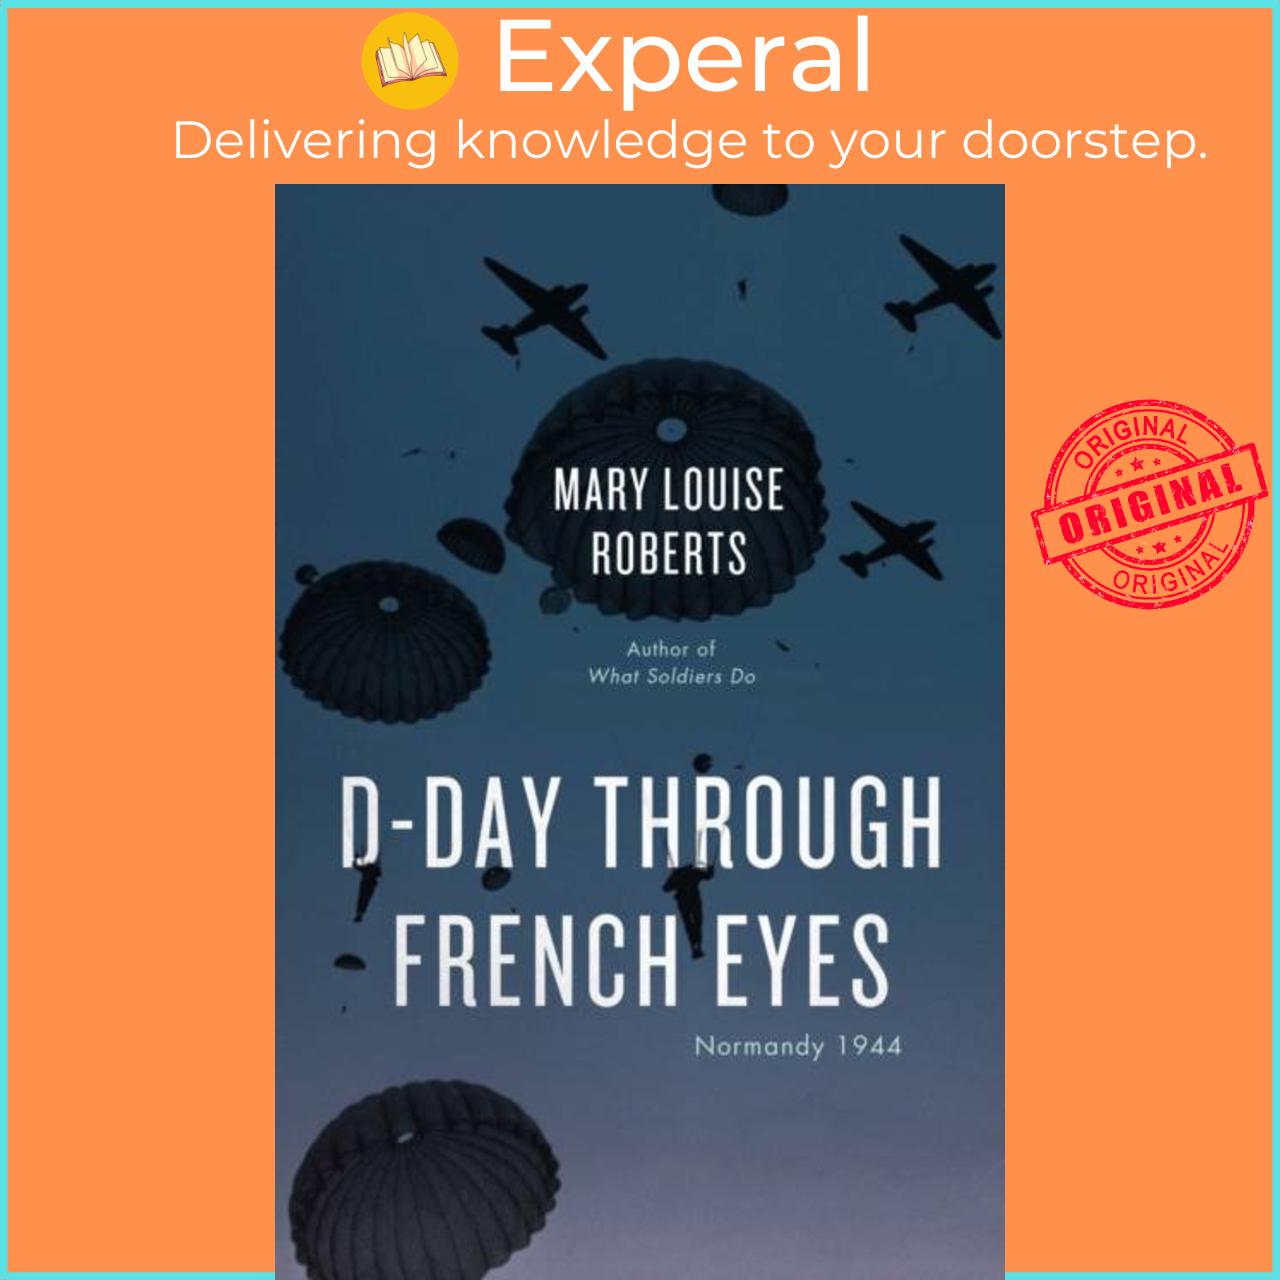 Sách - D-Day Through French Eyes - Normandy 1944 by Mary Louise Roberts (UK edition, paperback)